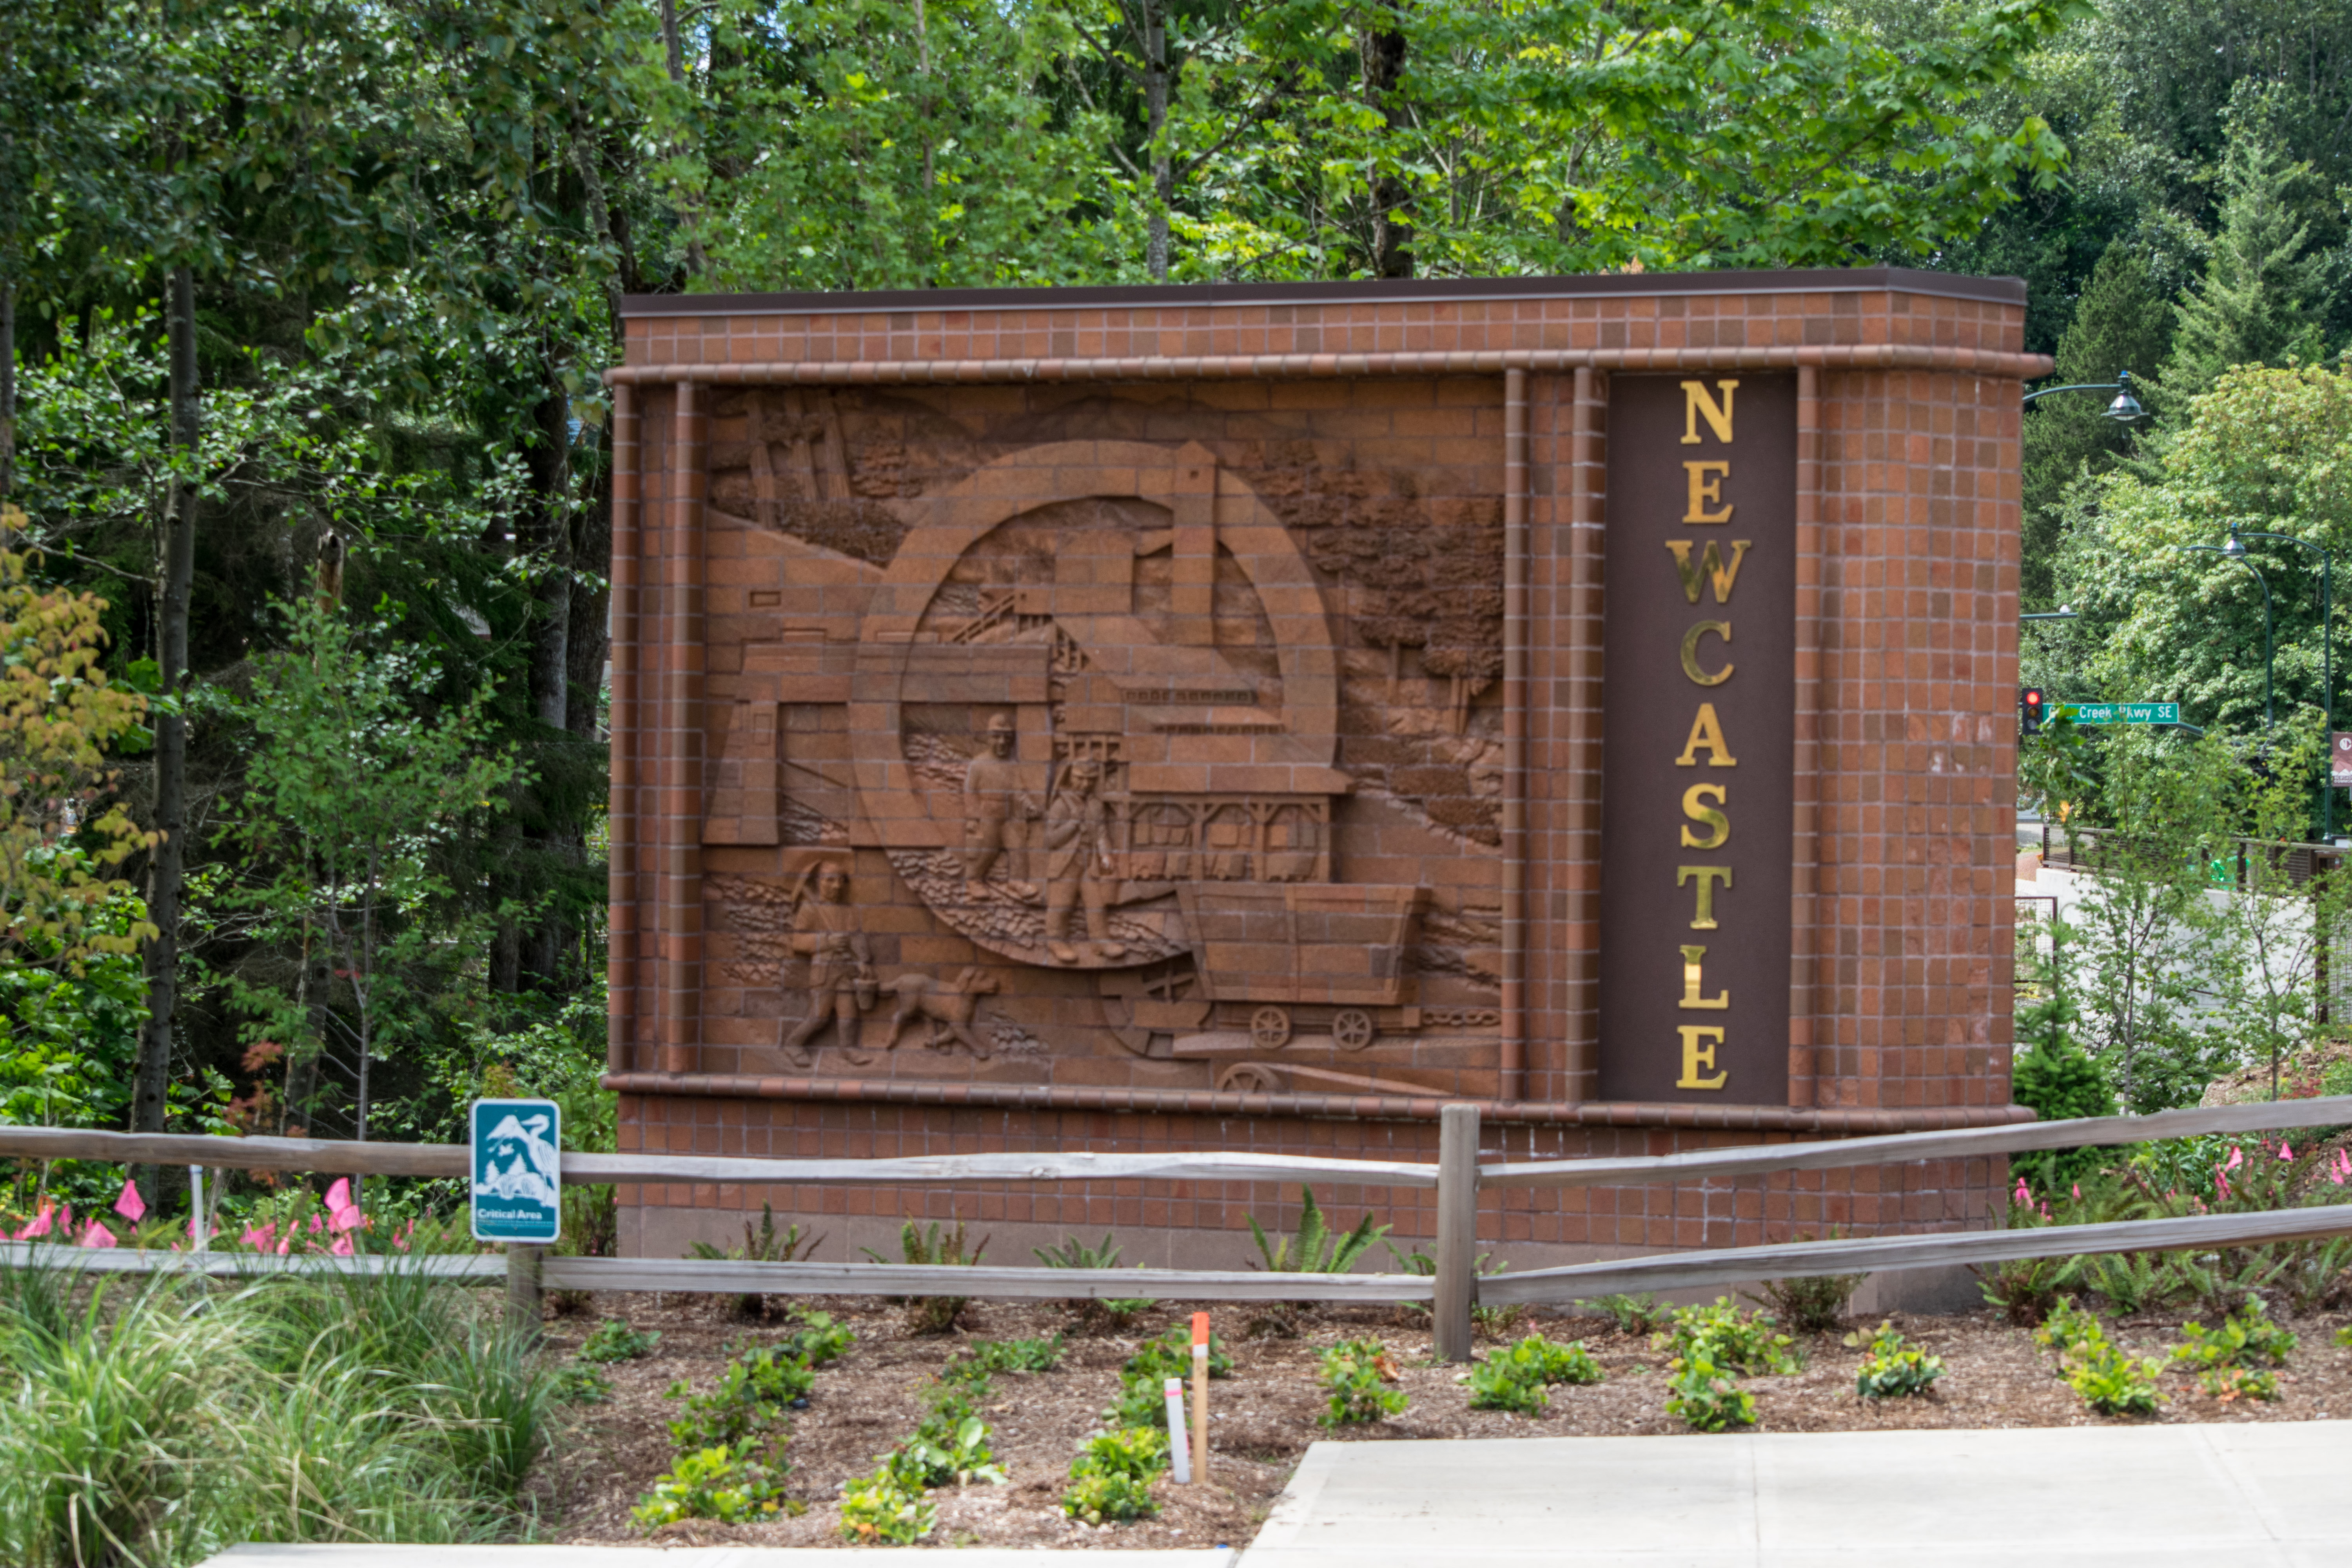 ../images/trails/thomas_rouse//07 Newcastle Monument on Commons Drive West of Trail.jpg